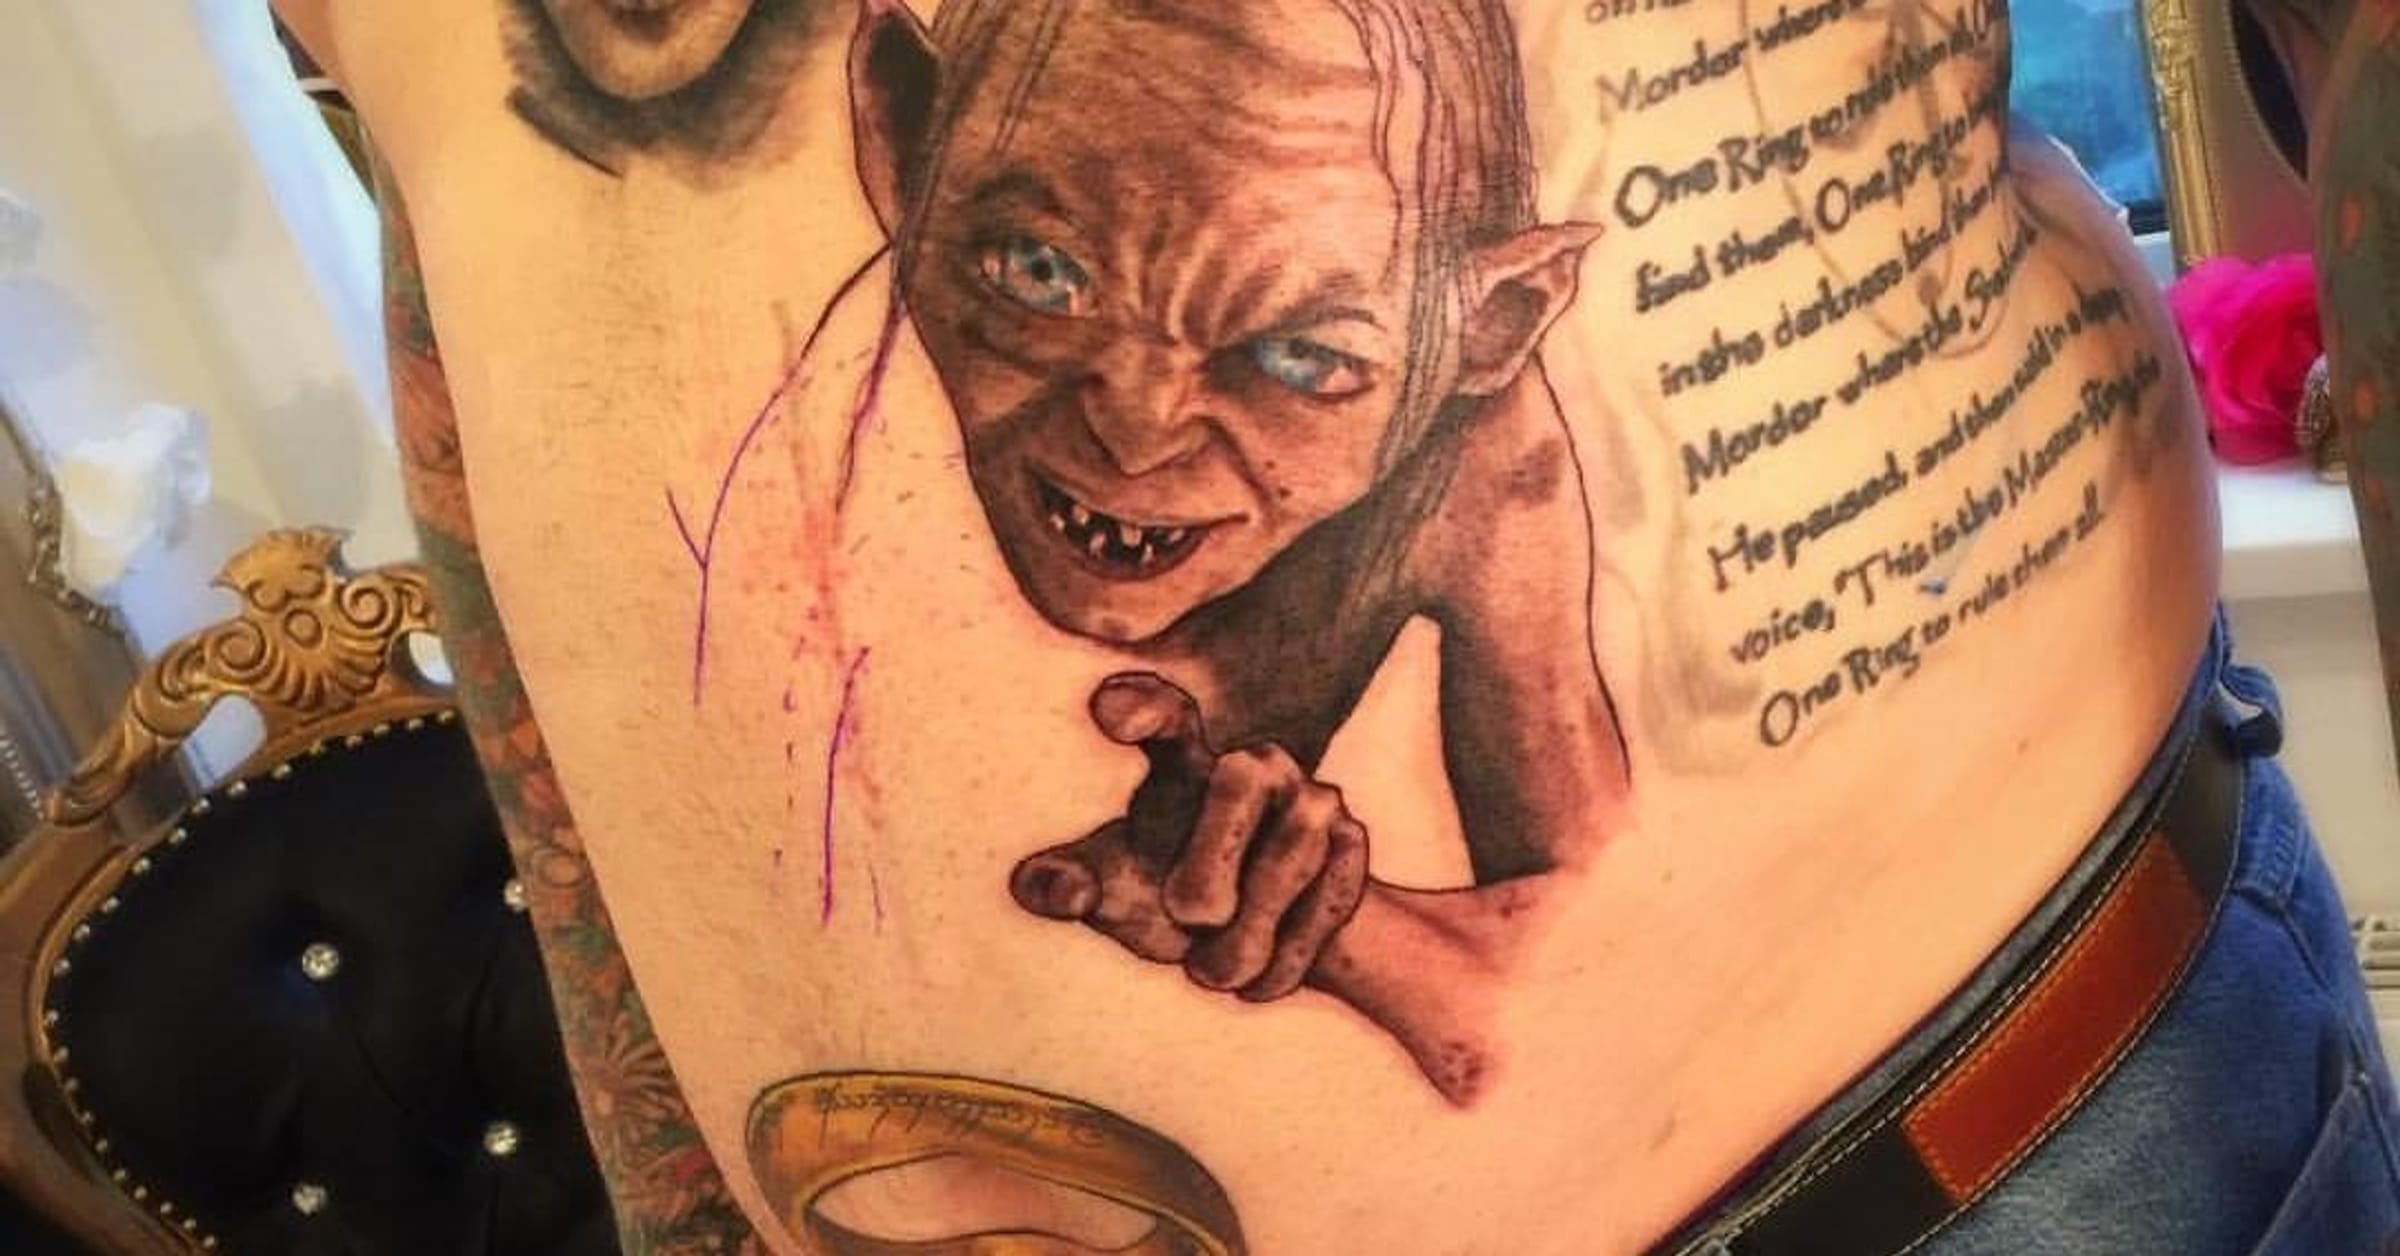 33 'The Lord of the Rings' Tattoos